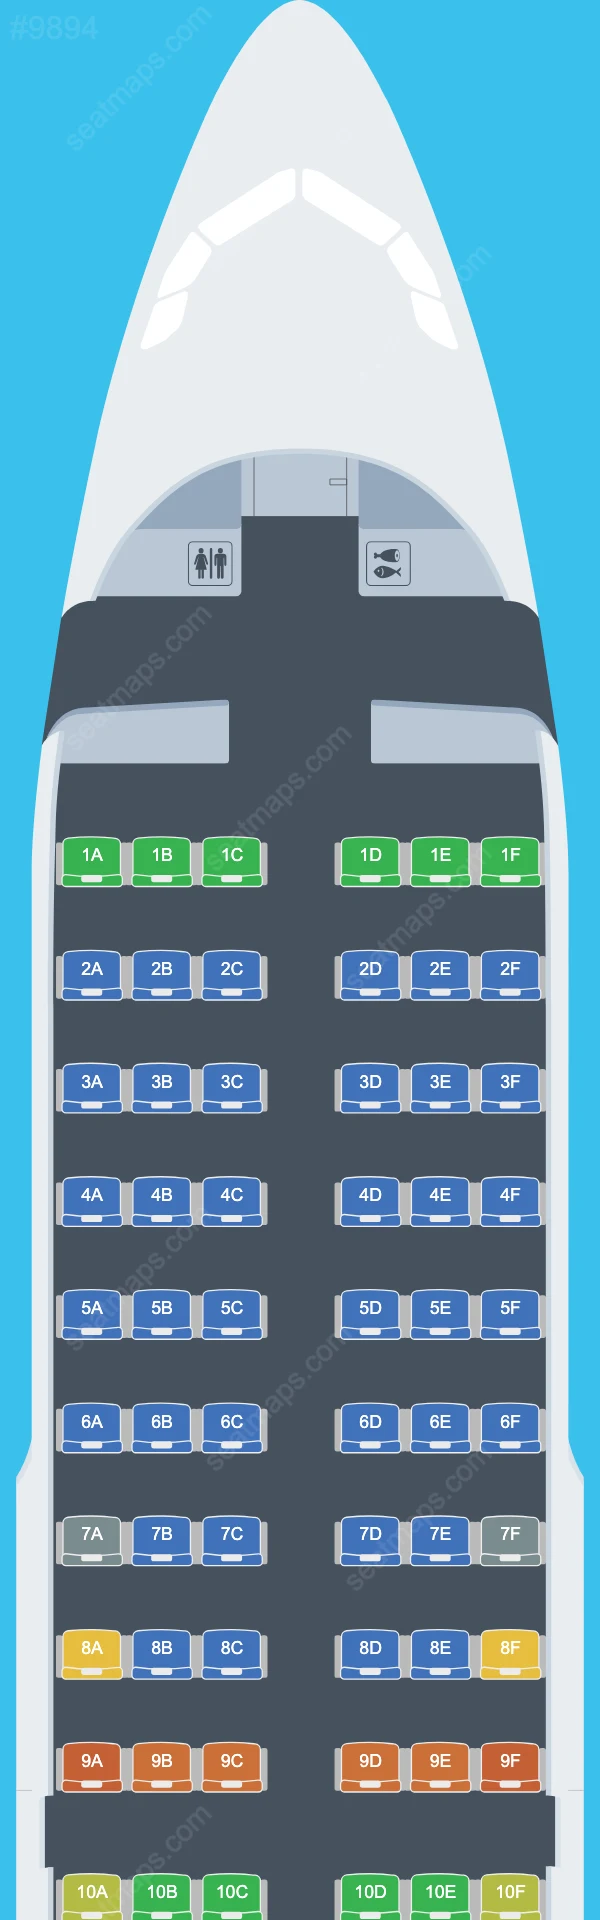 Hi Fly Airbus A319 Seat Maps A319-100 V.1